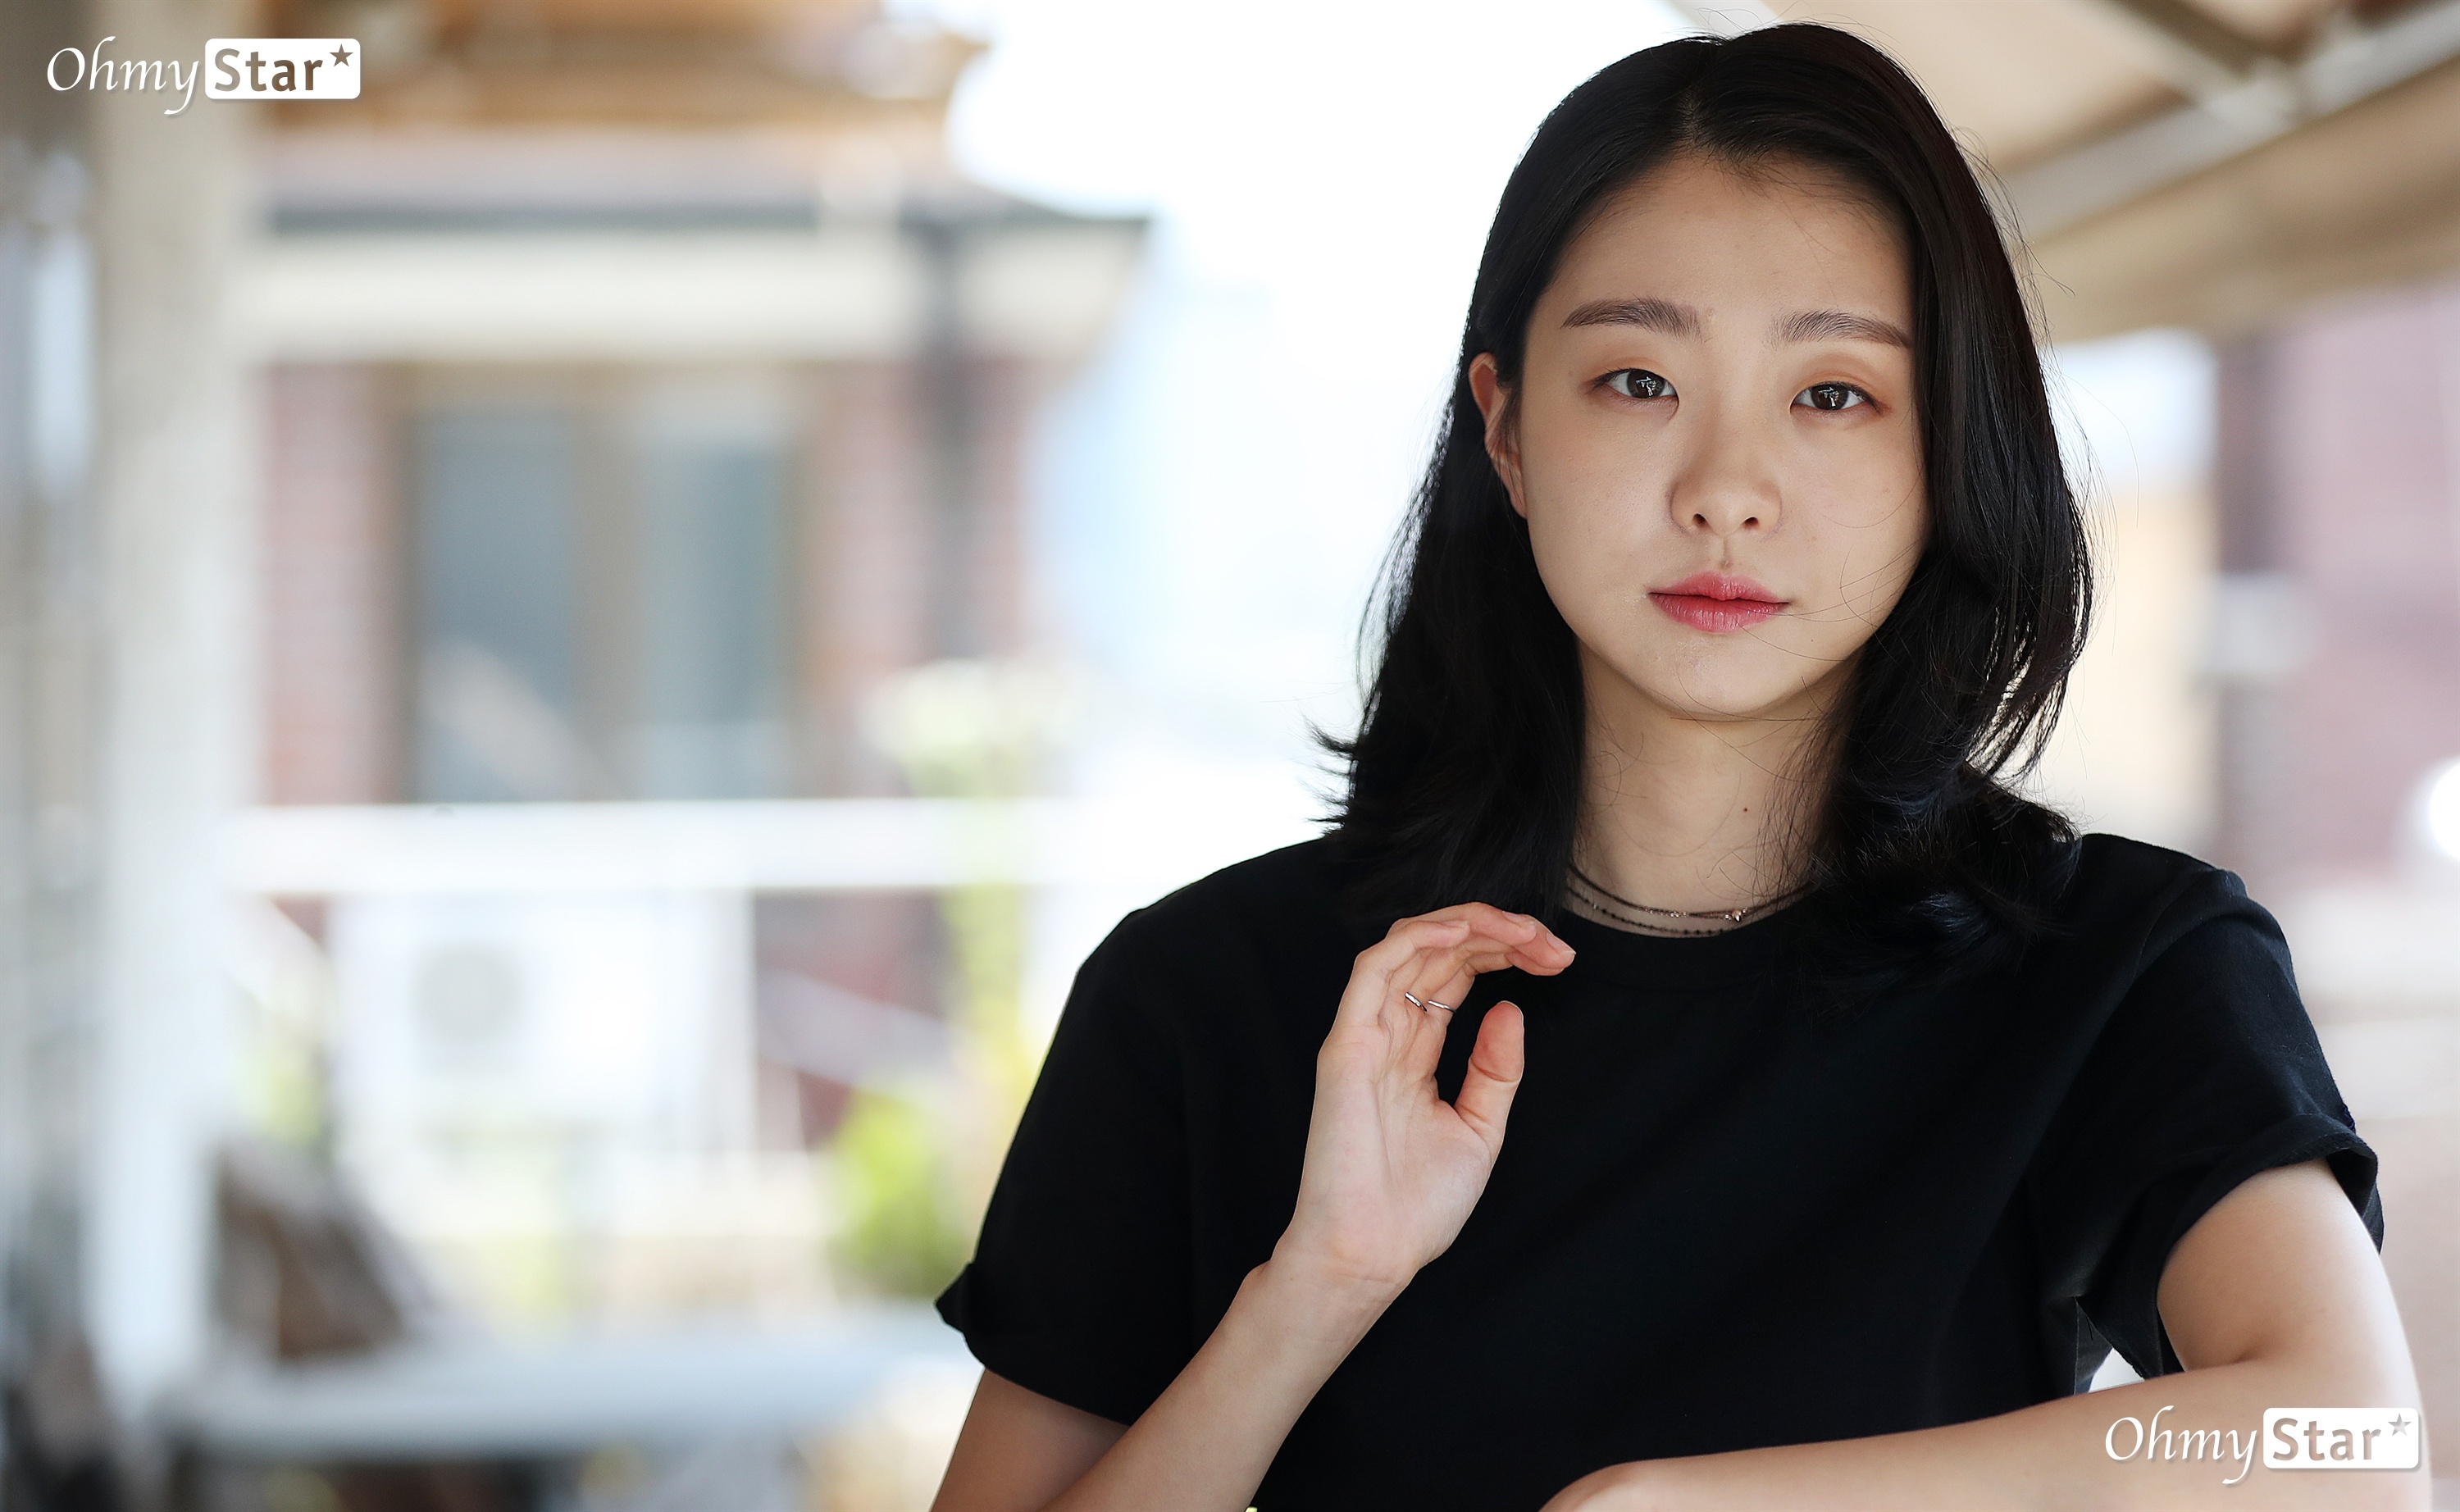 This can be summarized as follows: The SF Action genre is also a work that director Park Hoon-jung has long held.If it was as scheduled, the movie that should have been released before Daeho (2015) will now meet with the audience.At the center of it is new actor Kim Da-mi, 24, who made his debut in the 2017 film The Dongmyungin, and was selected by director Park Hoon-jung.Kim Da-mi was a girl who lost her memory in the play and had to express her character Zayun, who had no idea.be born into evil and learn goodI learned that I was auditioning for articles, and I applied for the selection of a new person, and I prepared it for giving a script that shows the character of Jayun in the play.In the first period, I was trying hard, but I went up to the third audition. Then I heard the fear of What if it really is? Then, director Park Hoon-jung gave me the script himself.I didnt realize it then: Is it really?, I thought, and when I came home and looked around, I started to worry (laugh) at the same time.Expressing the nature of Jayun itself was a challenge.I was worried about whether this character was good or evil, Kim Da-mi said. I thought that was the charm of <witch>, and I will have the same question from the audience.Technically, Jayun is a monster, because he is a combat human made of genetic engineering products, whether he knows or not.The upper line, which could not control him, tries to remove the young self-sacrifice, but as the self-sacrifice hides into the home of an elderly couple, he learns family love and friendship.It may have been evil originally, but it can be said that it learned good by growing up.When I meet my family, I live by evil. I wondered about Jayuns real heart in the relationship between my parents and Friend Myung-hee (Gormin City); I talked a lot with the director about what is true and what is false.People dont live with one emotion. They love their parents and Friends, but they think theyre evil characters.There was, of course, a part that didnt make sense. I had to keep reading. And I kept asking. Why did Zayun behave like that?I kept asking questions, and I tried to find the answer as much as I could, and I didnt conclude that one thing was special: I went to the scene and went out one by one, breathing with other actors.secret of action (The bishop) wanted a restrained and concise action, such an action that felt powerful even if it was small, it was difficult.It was hard to do it without showing off to use his strength. I think Ja-yoon is not his opponent over the honorable (Choi Woo-sik).A strong person does not express that strength on the outside. It was important to look as relaxed and comfortable as possible. If the character who does not reveal himself well but proves who he is through action, there seemed to be a point that resembles Kim Da-mi.I was serious about acting when I was a child and I thought it was in high school, he explained.I usually did plays in college, and did you have a short film experience in high school? Not much. Theres no particular occasion for acting.It was a vague idea that I had when I was a child, watching TV or movies, and when I told my parents, I would have dreamed of talking for a while.Then I went to high school and told you again, I should do what I want to do and applied.I dont usually express my feelings well, but I feel empathy on TV or in movies, and it was also attractive that I could do what I did not normally do through acting.Im still in my early twenties and have no experience, so Im trying to audition and do my best.I do not really raise my worries (laughs) in nature. Kim Da-mi was facing his position.Asked what actor he wants to be, he said, I do not have much experience yet, so if I experience it in various ways, I will think about it.Its still an unknown area, but apparently, witch is a chance for Kim Da-mi to be deeply imprinted on the public.Kim Da-mi, supporting parents, raising actor dreams... I want to play various roles